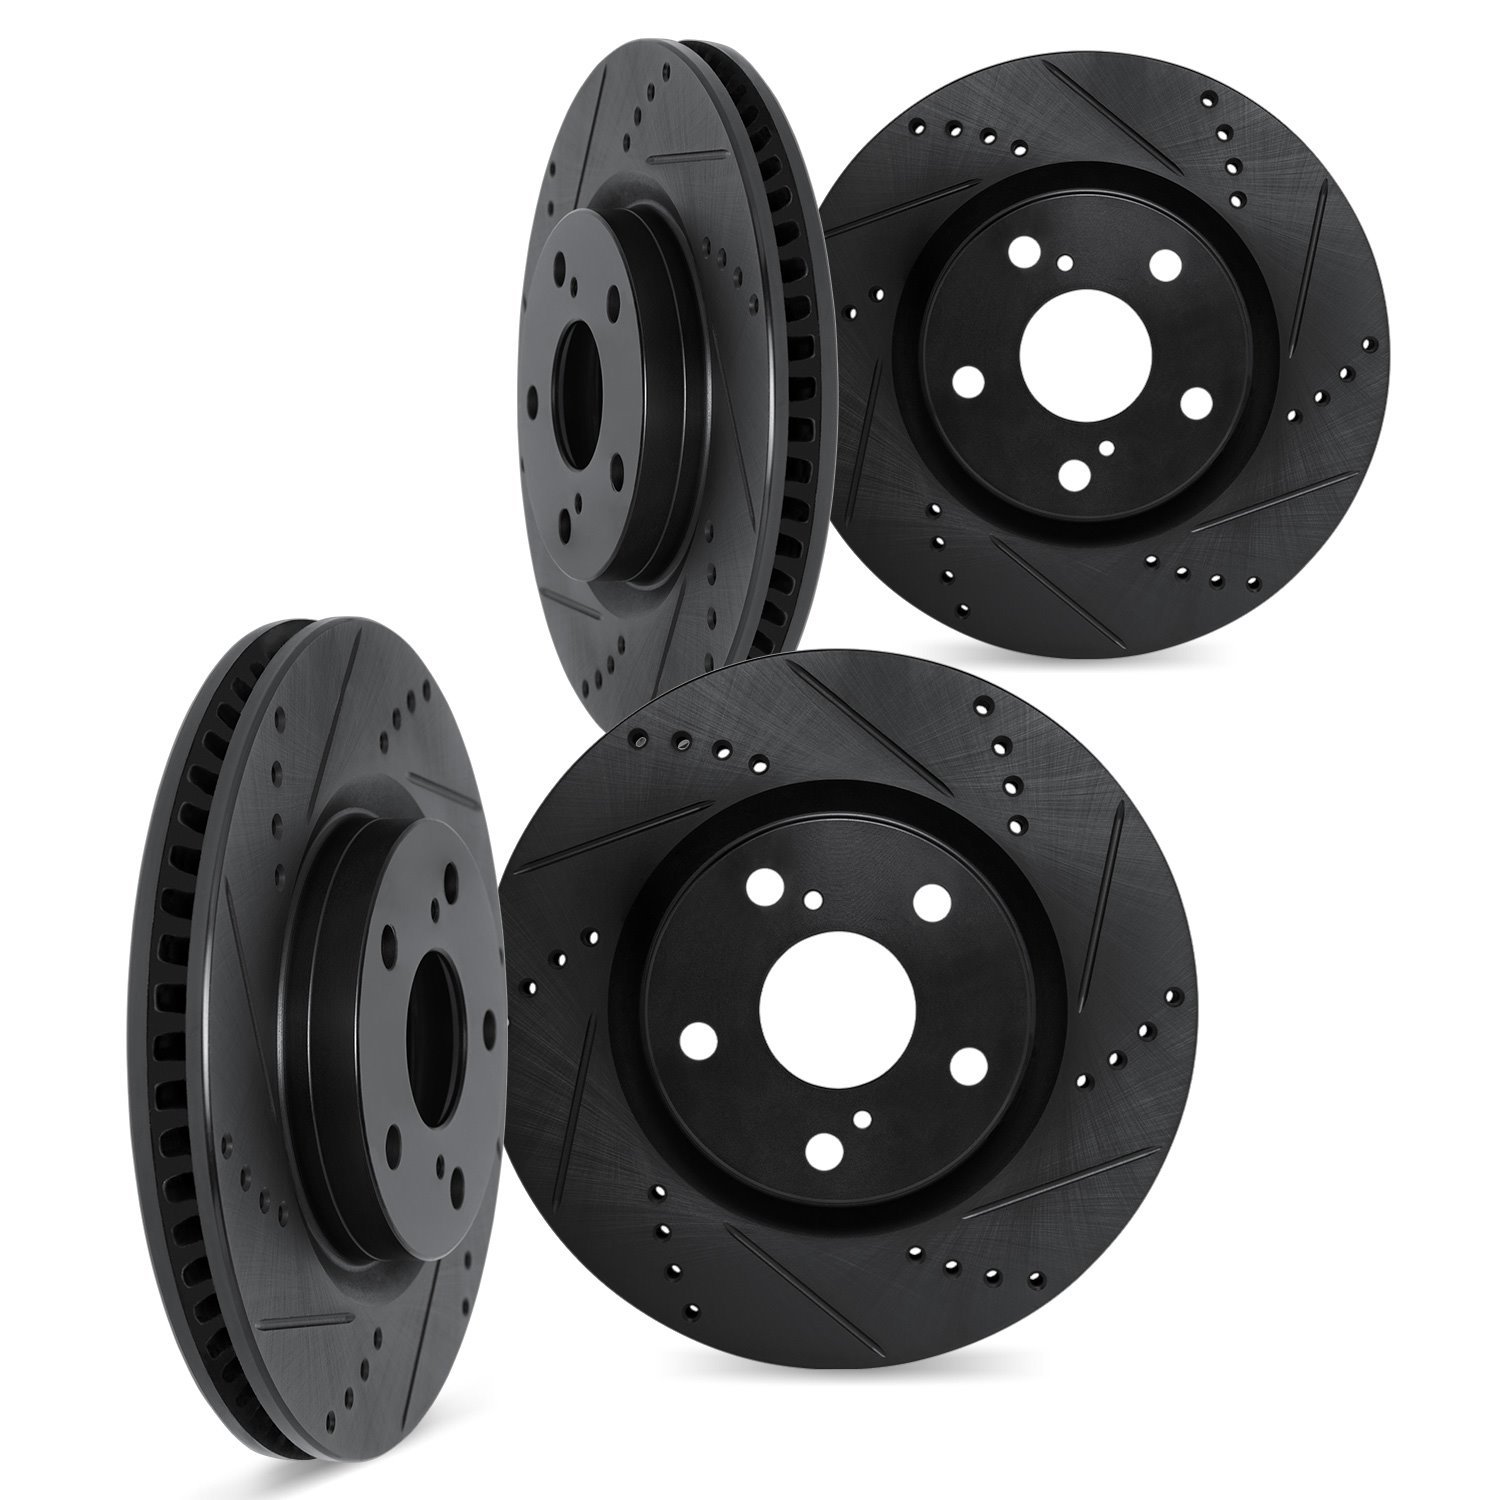 8004-02018 Drilled/Slotted Brake Rotors [Black], 1987-1995 Porsche, Position: Front and Rear